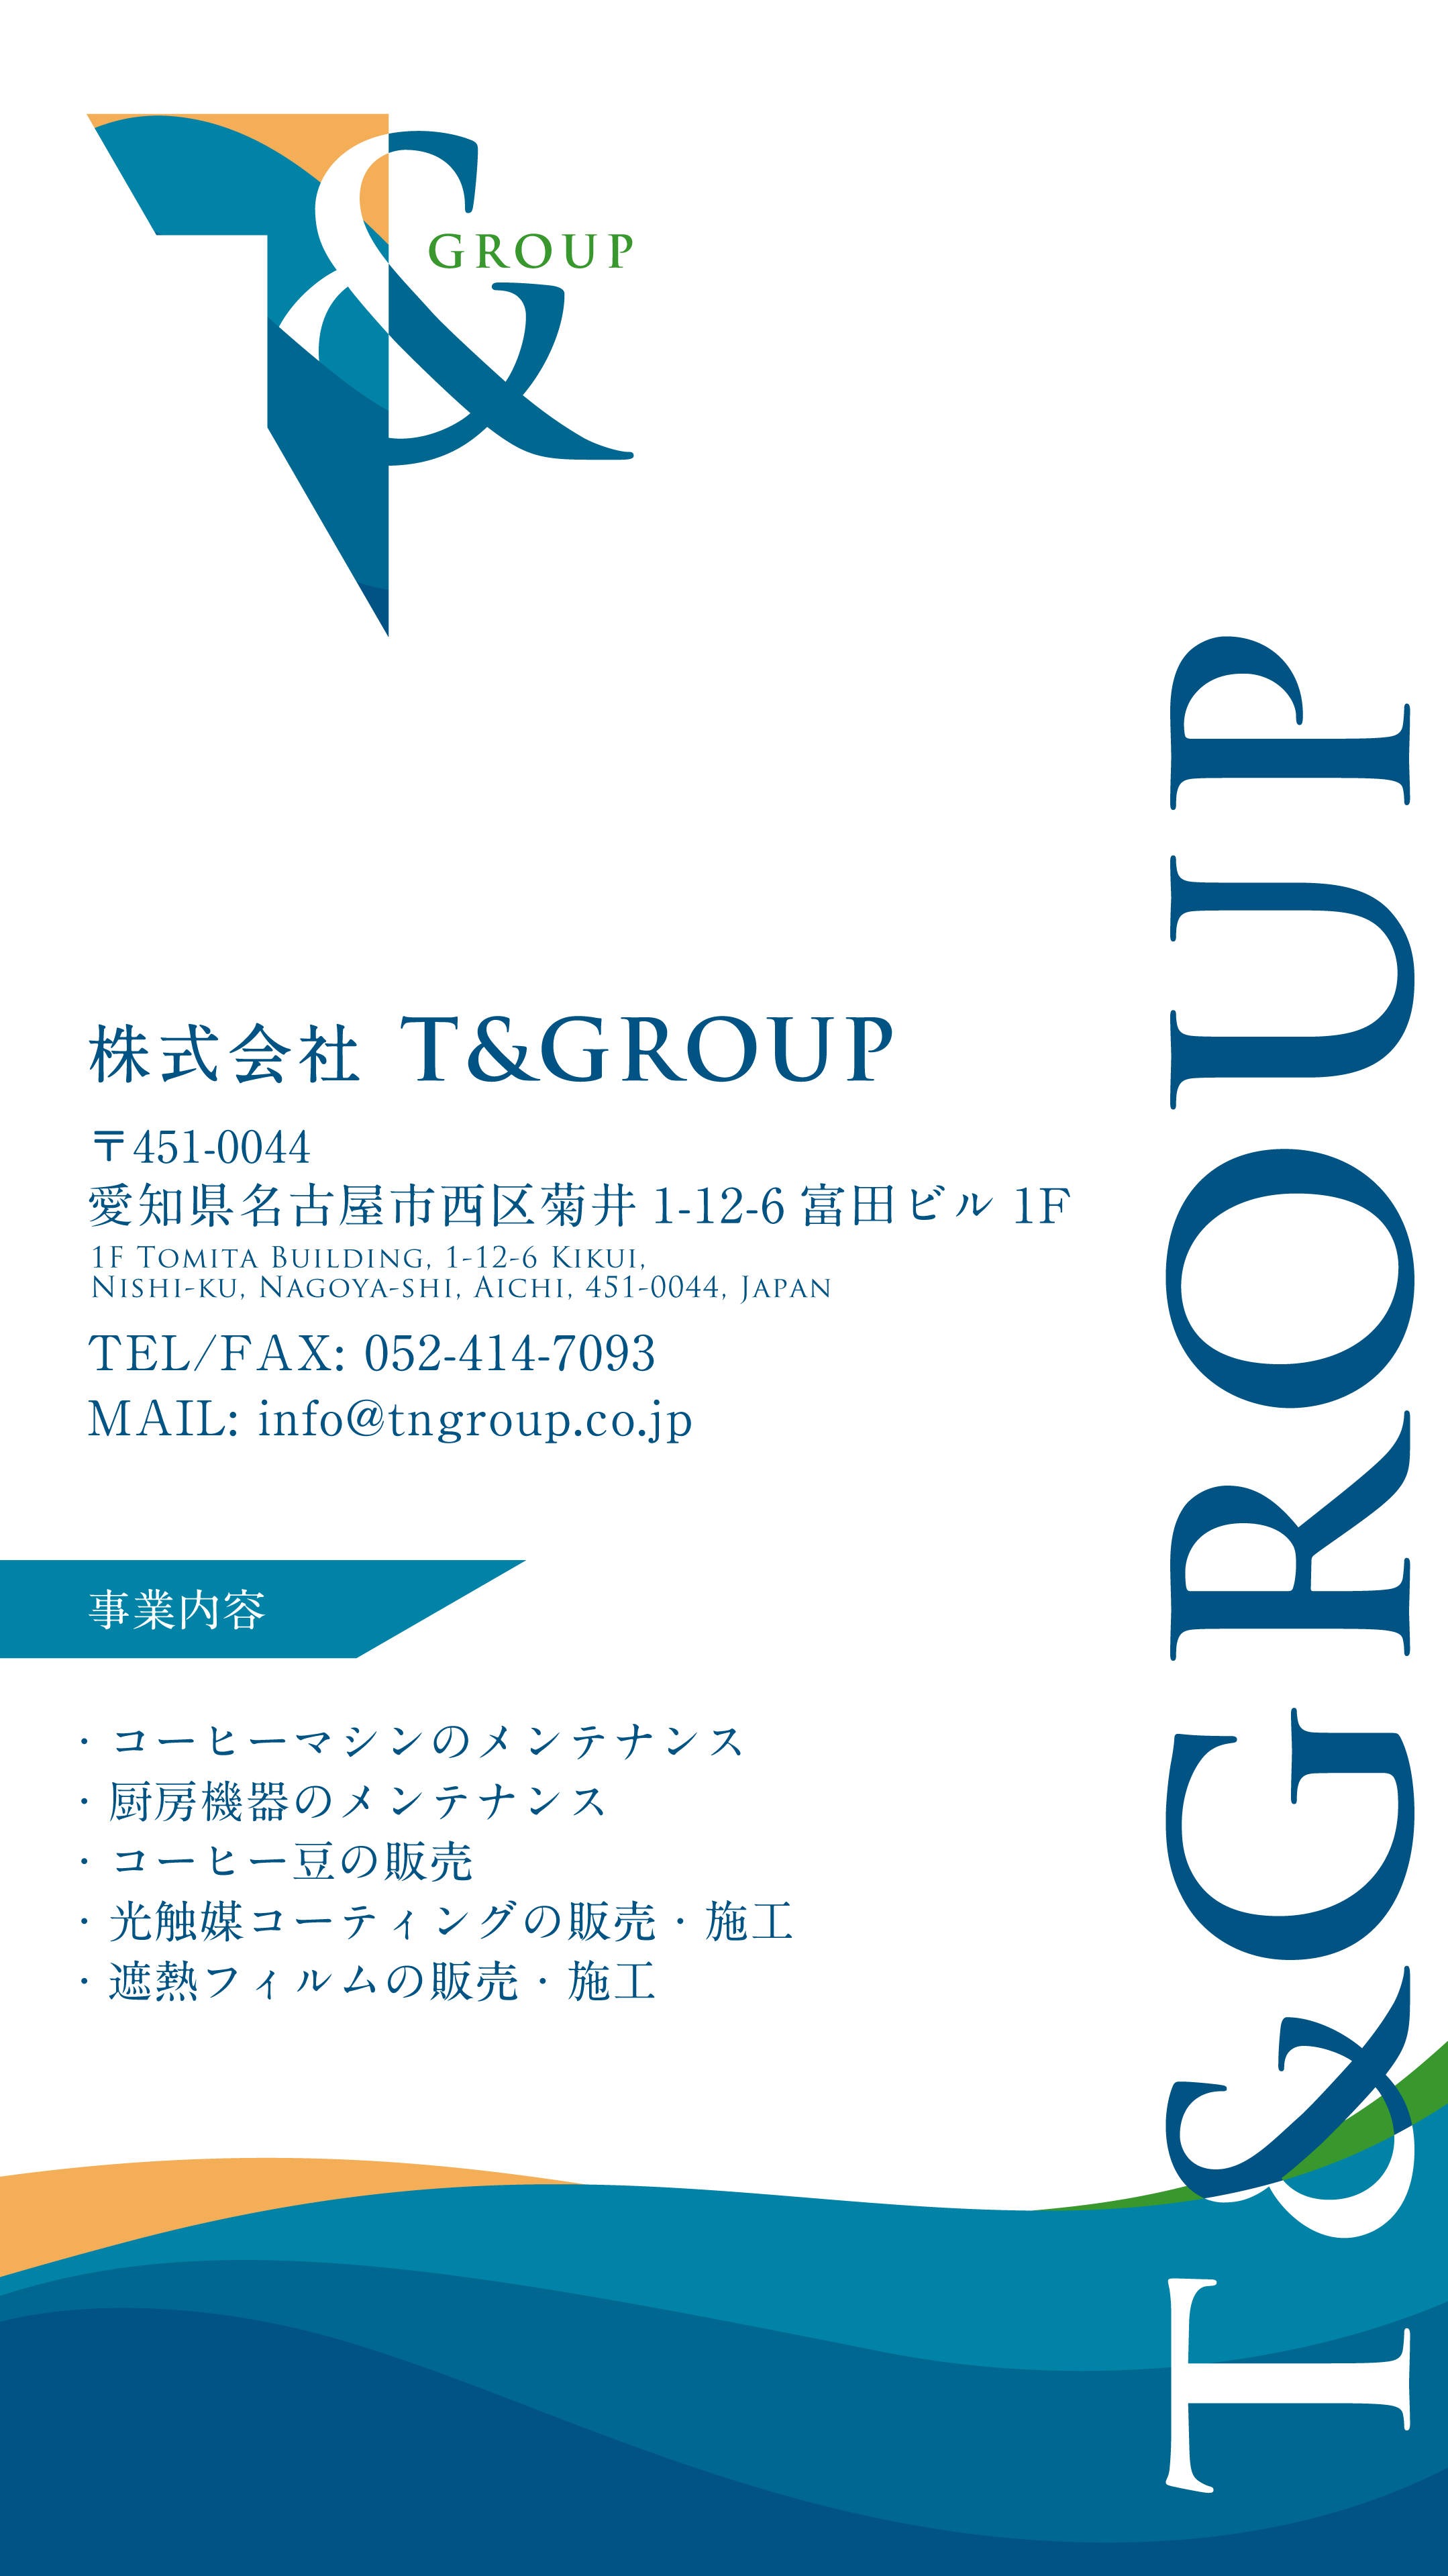 T&GROUP